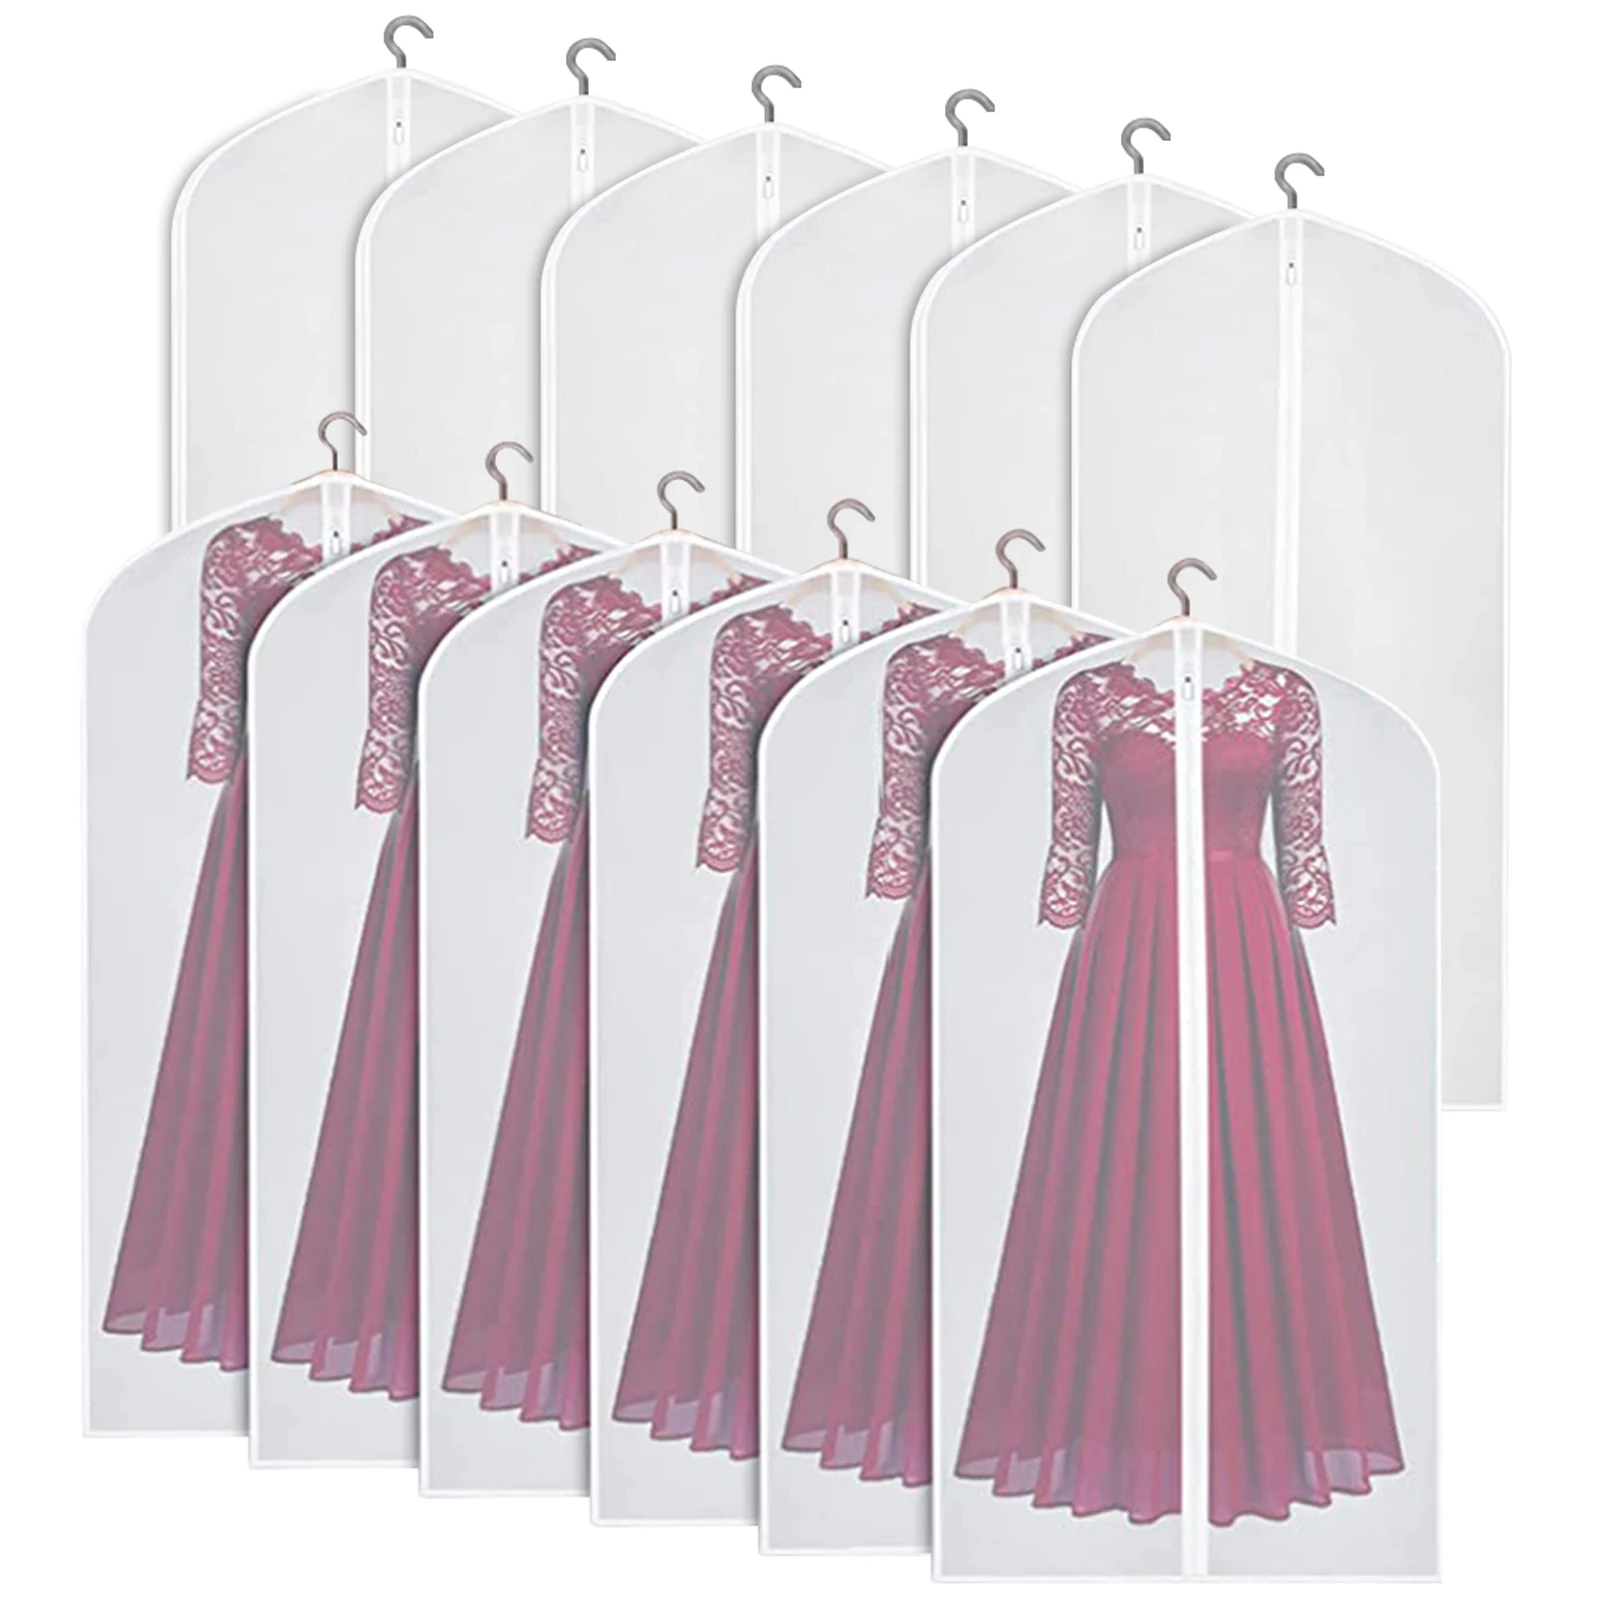 

12pcs Daily Garment Bag Breathable Clothes Dust Cover Closet Organizer Translucent PEVA Home Clothing Store Hanging Universal